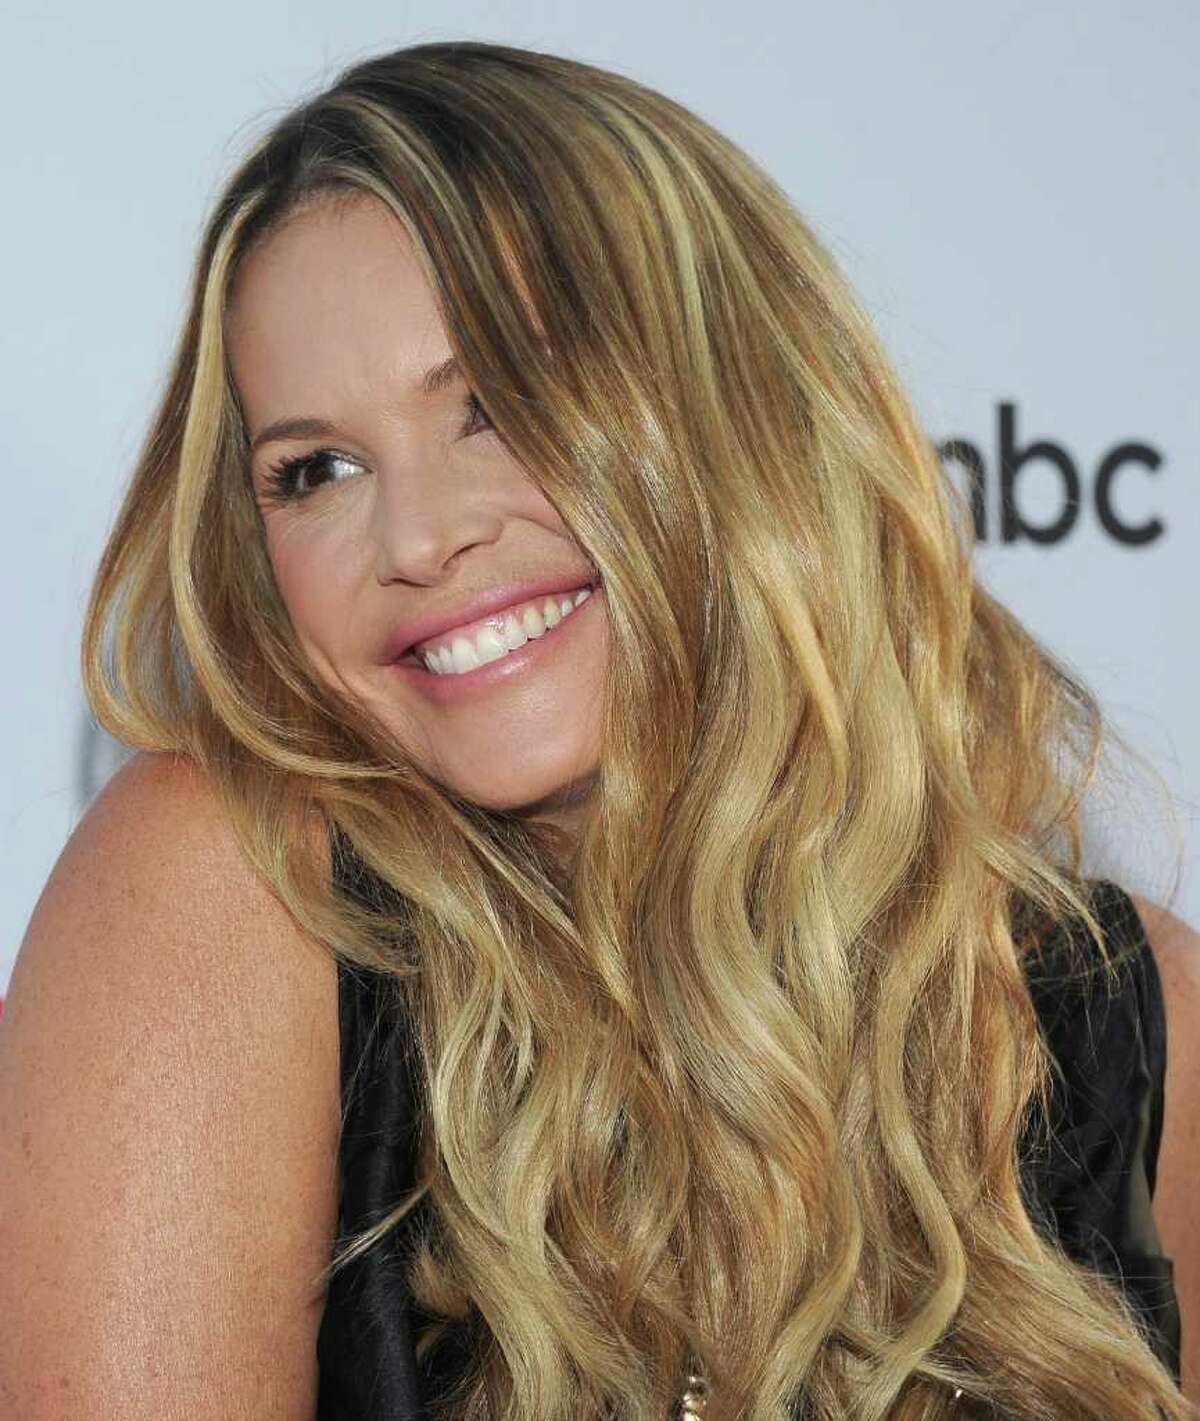  Actress Elle MacPherson arrives at the NBC Universal TCA 2011 Press Tour All-Star Party at the SLS Hotel in Los Angeles, California.